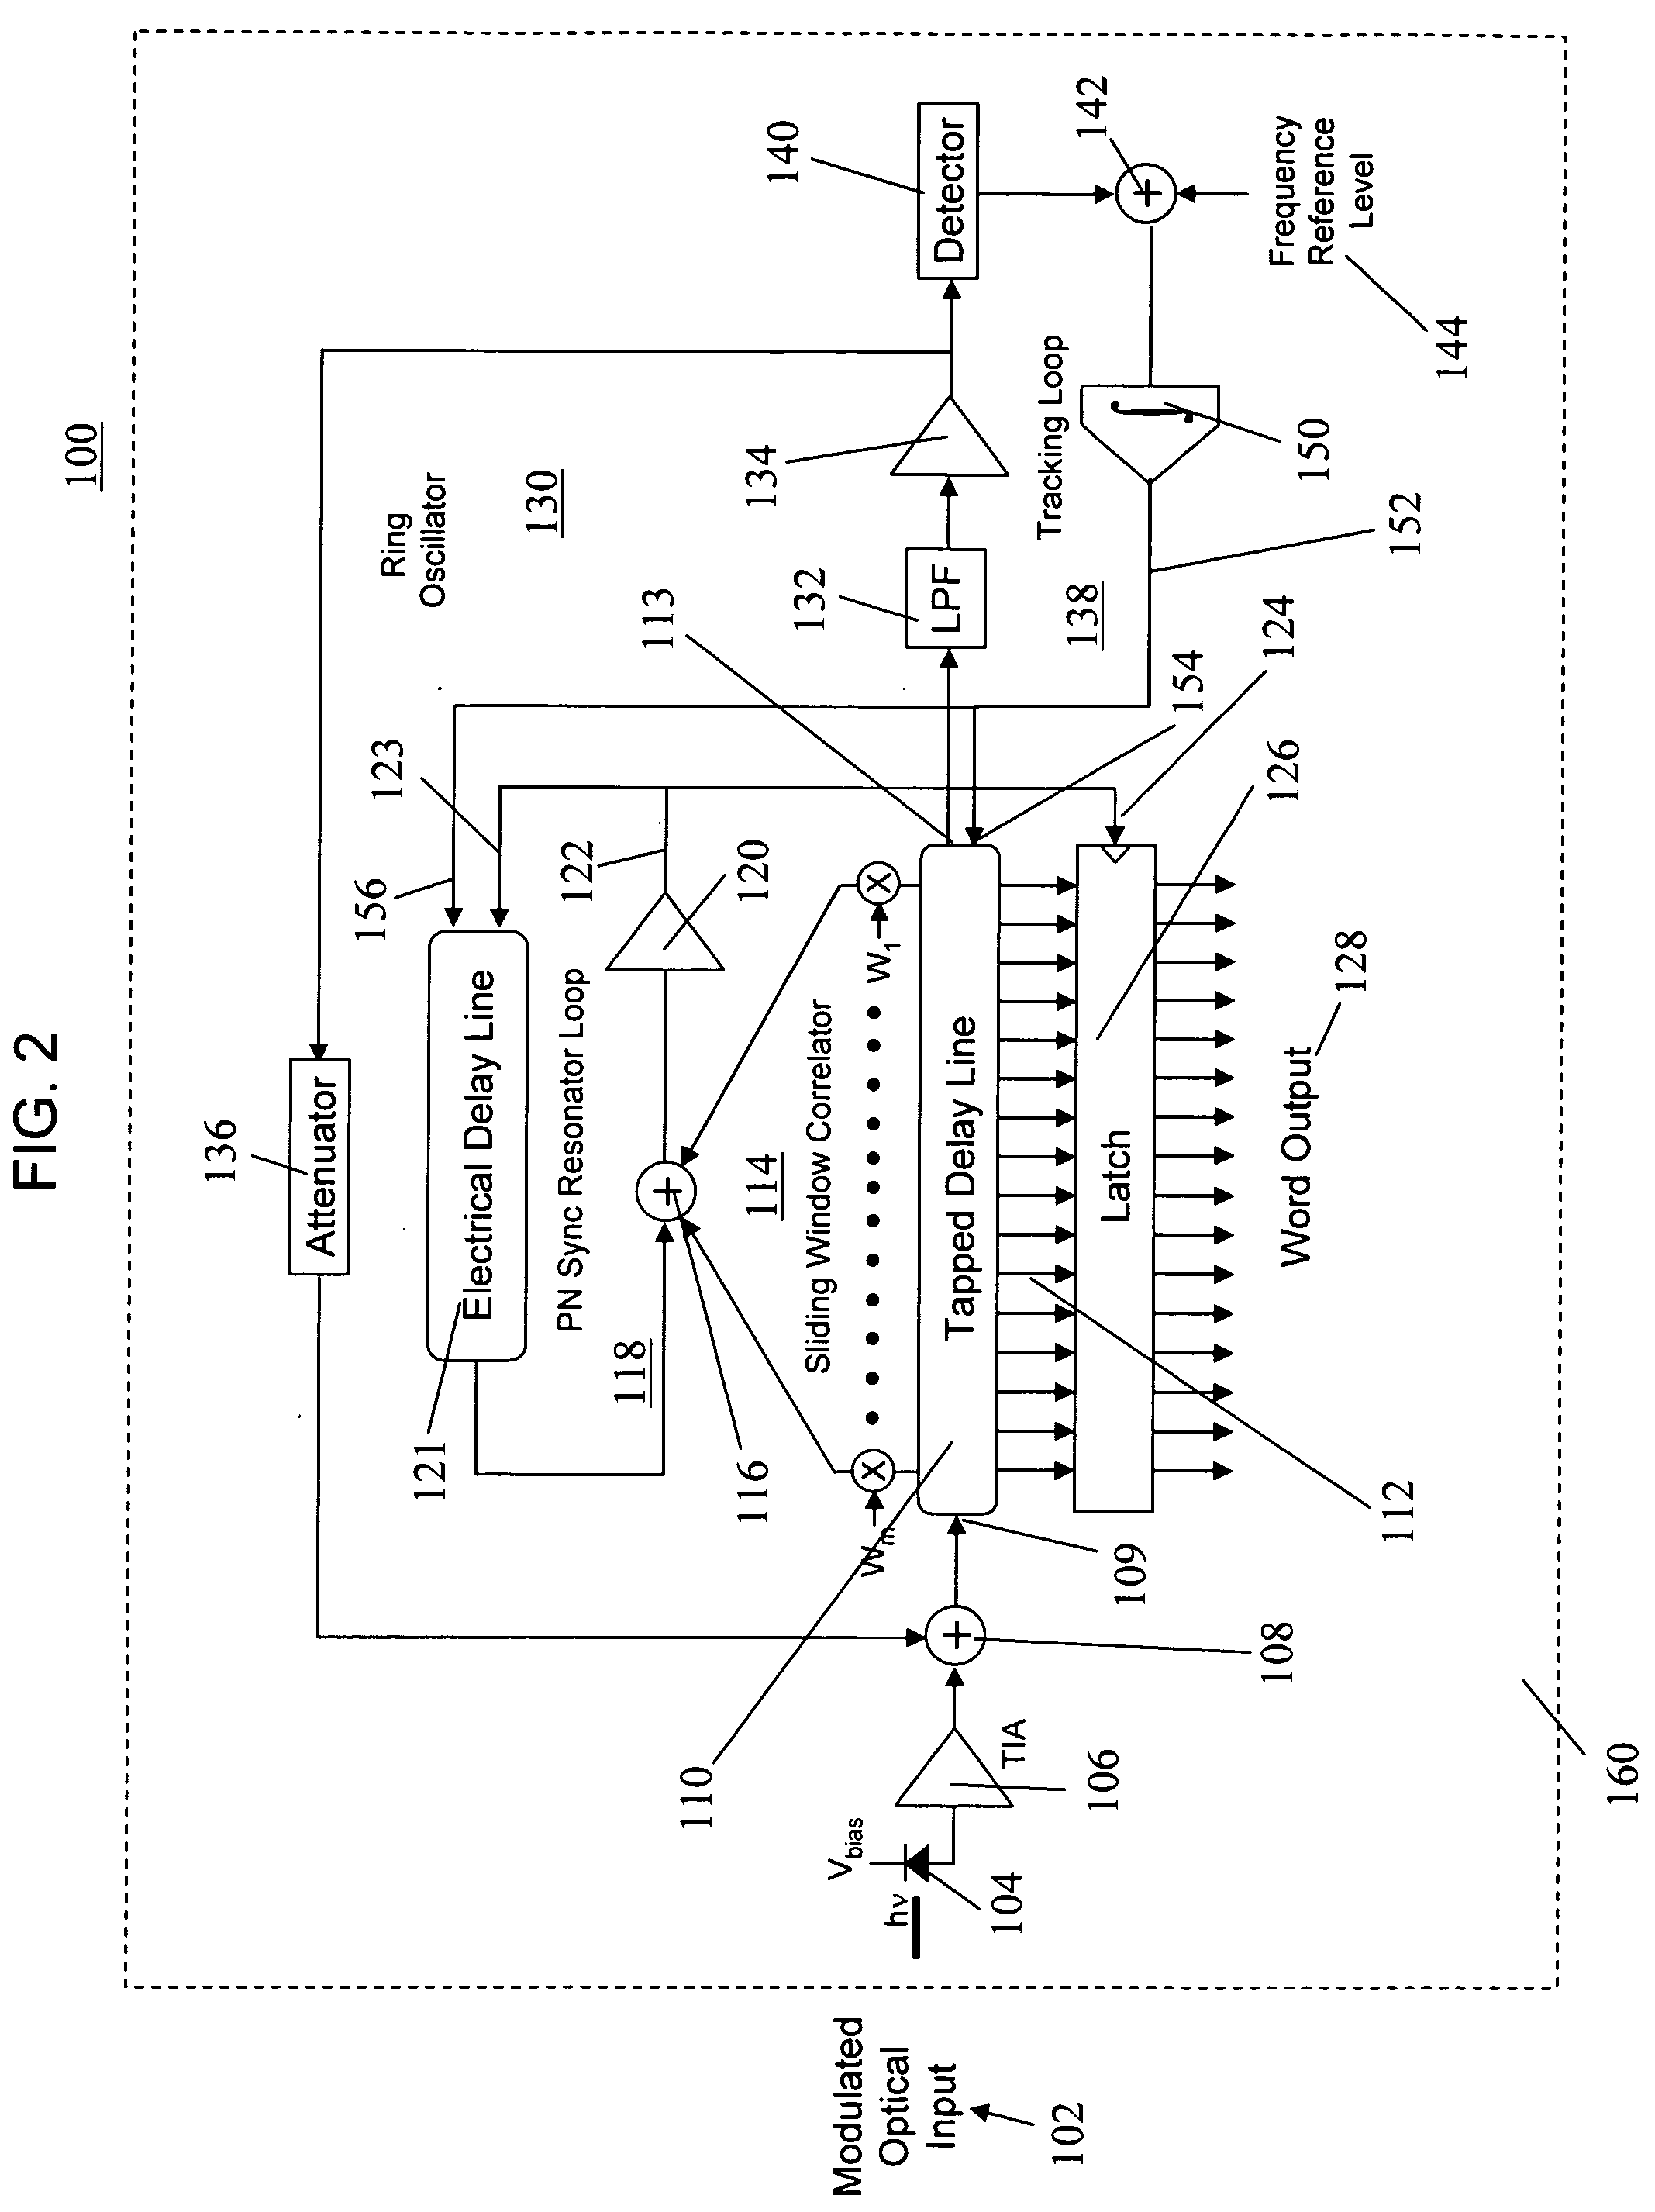 Burst communications apparatus and method using tapped delay lines